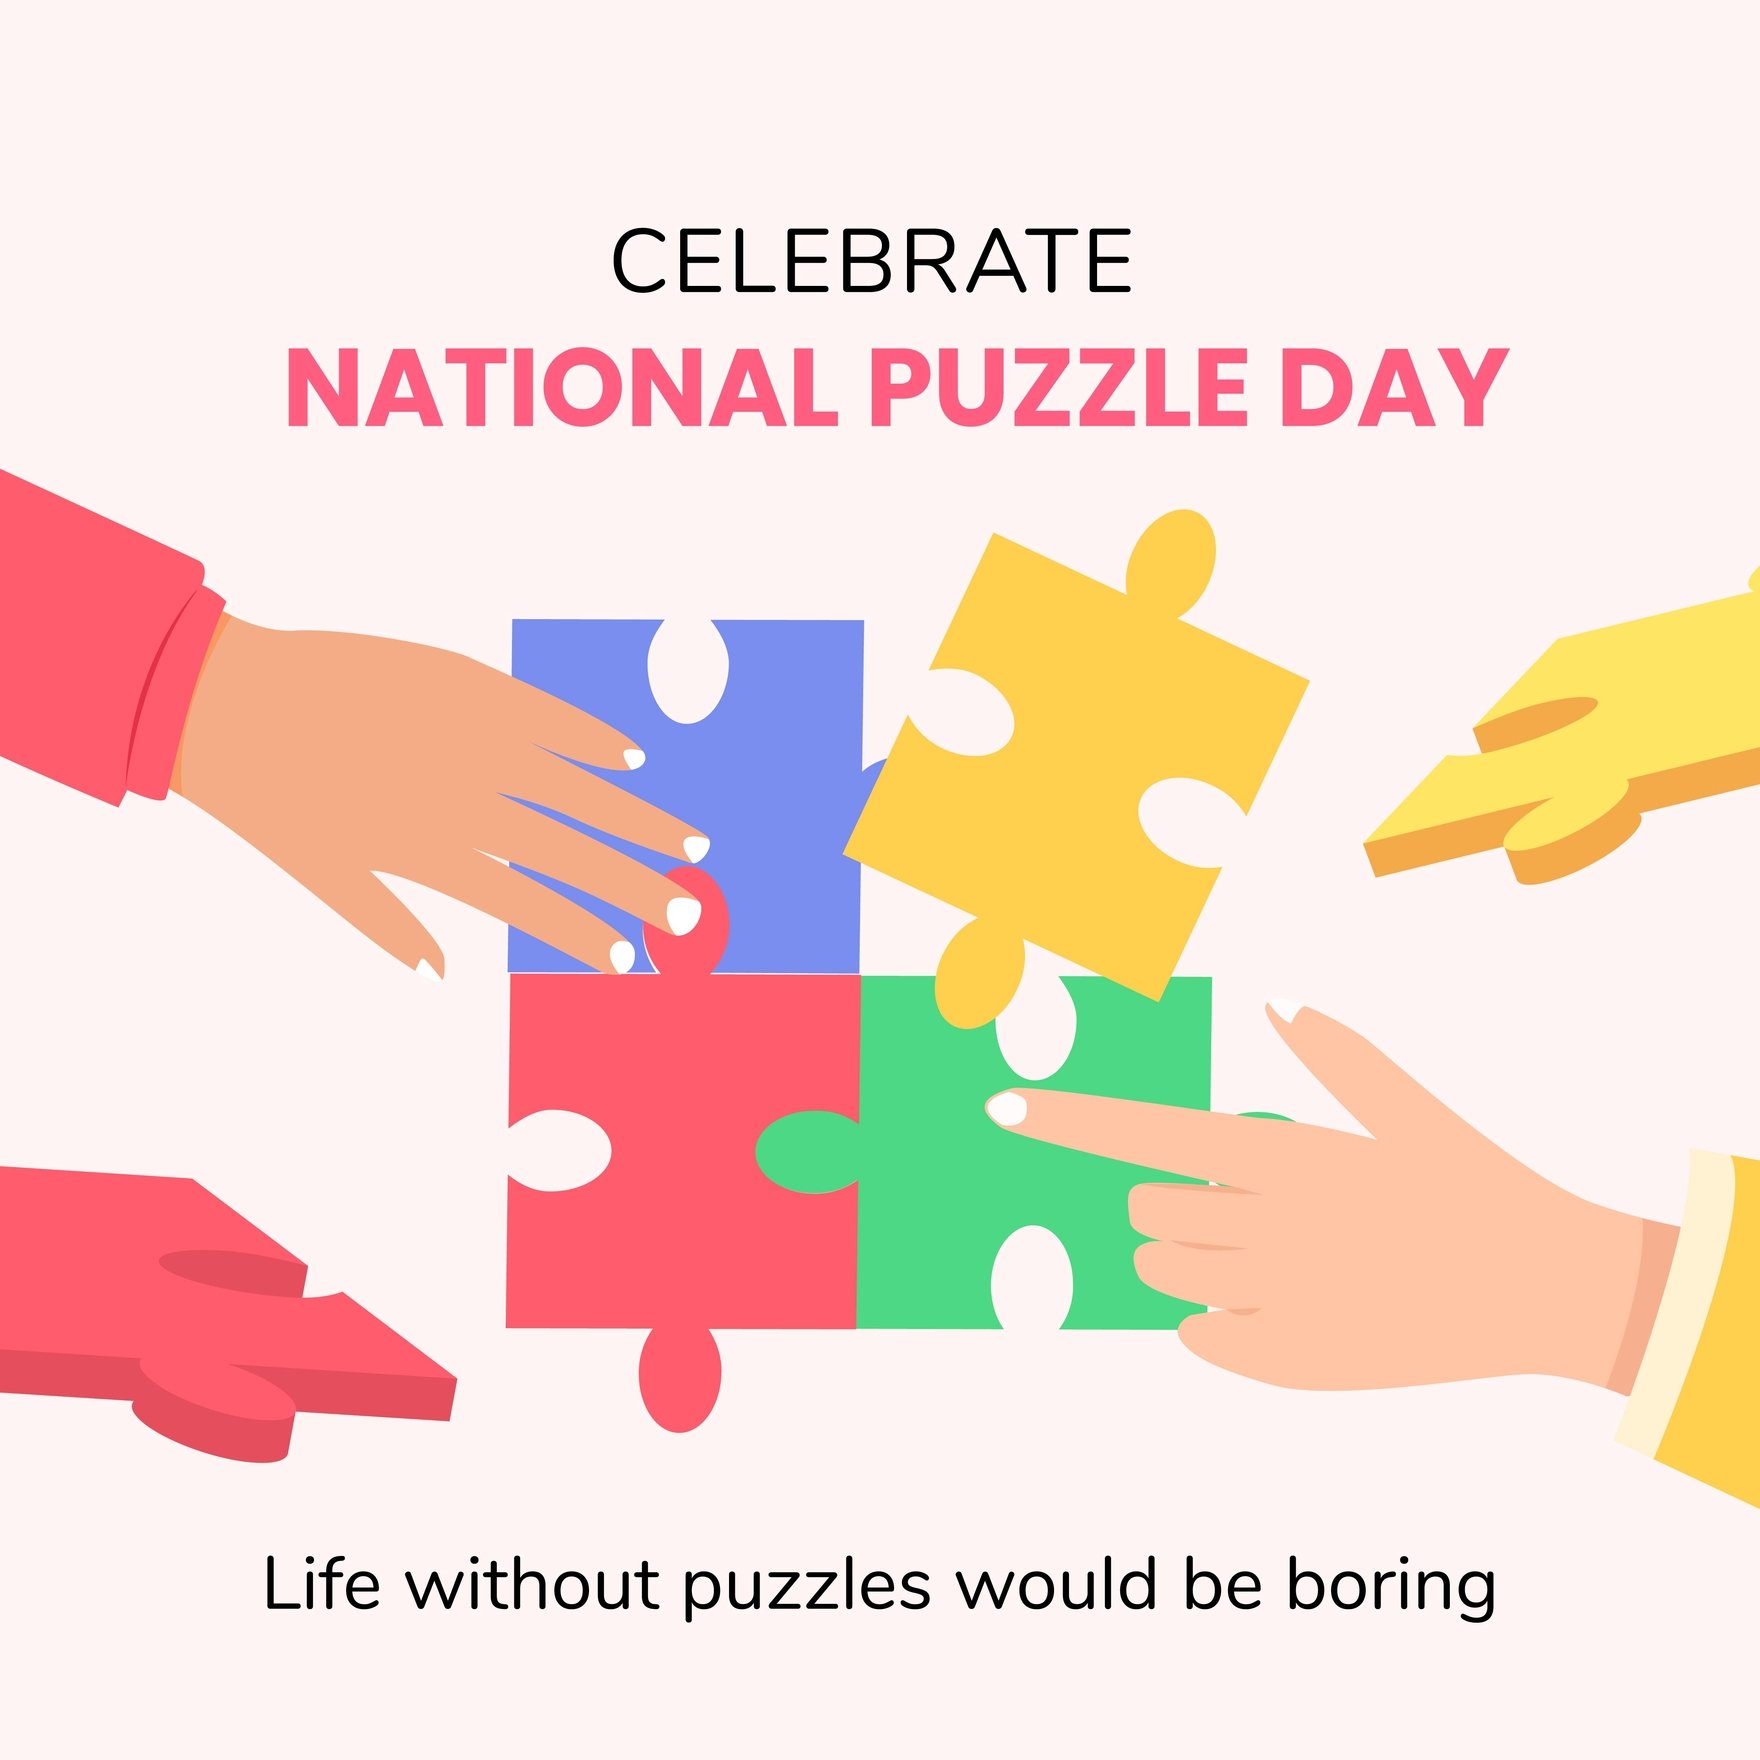 National Puzzle Day FB Post in Illustrator, PSD, EPS, SVG, PNG, JPEG